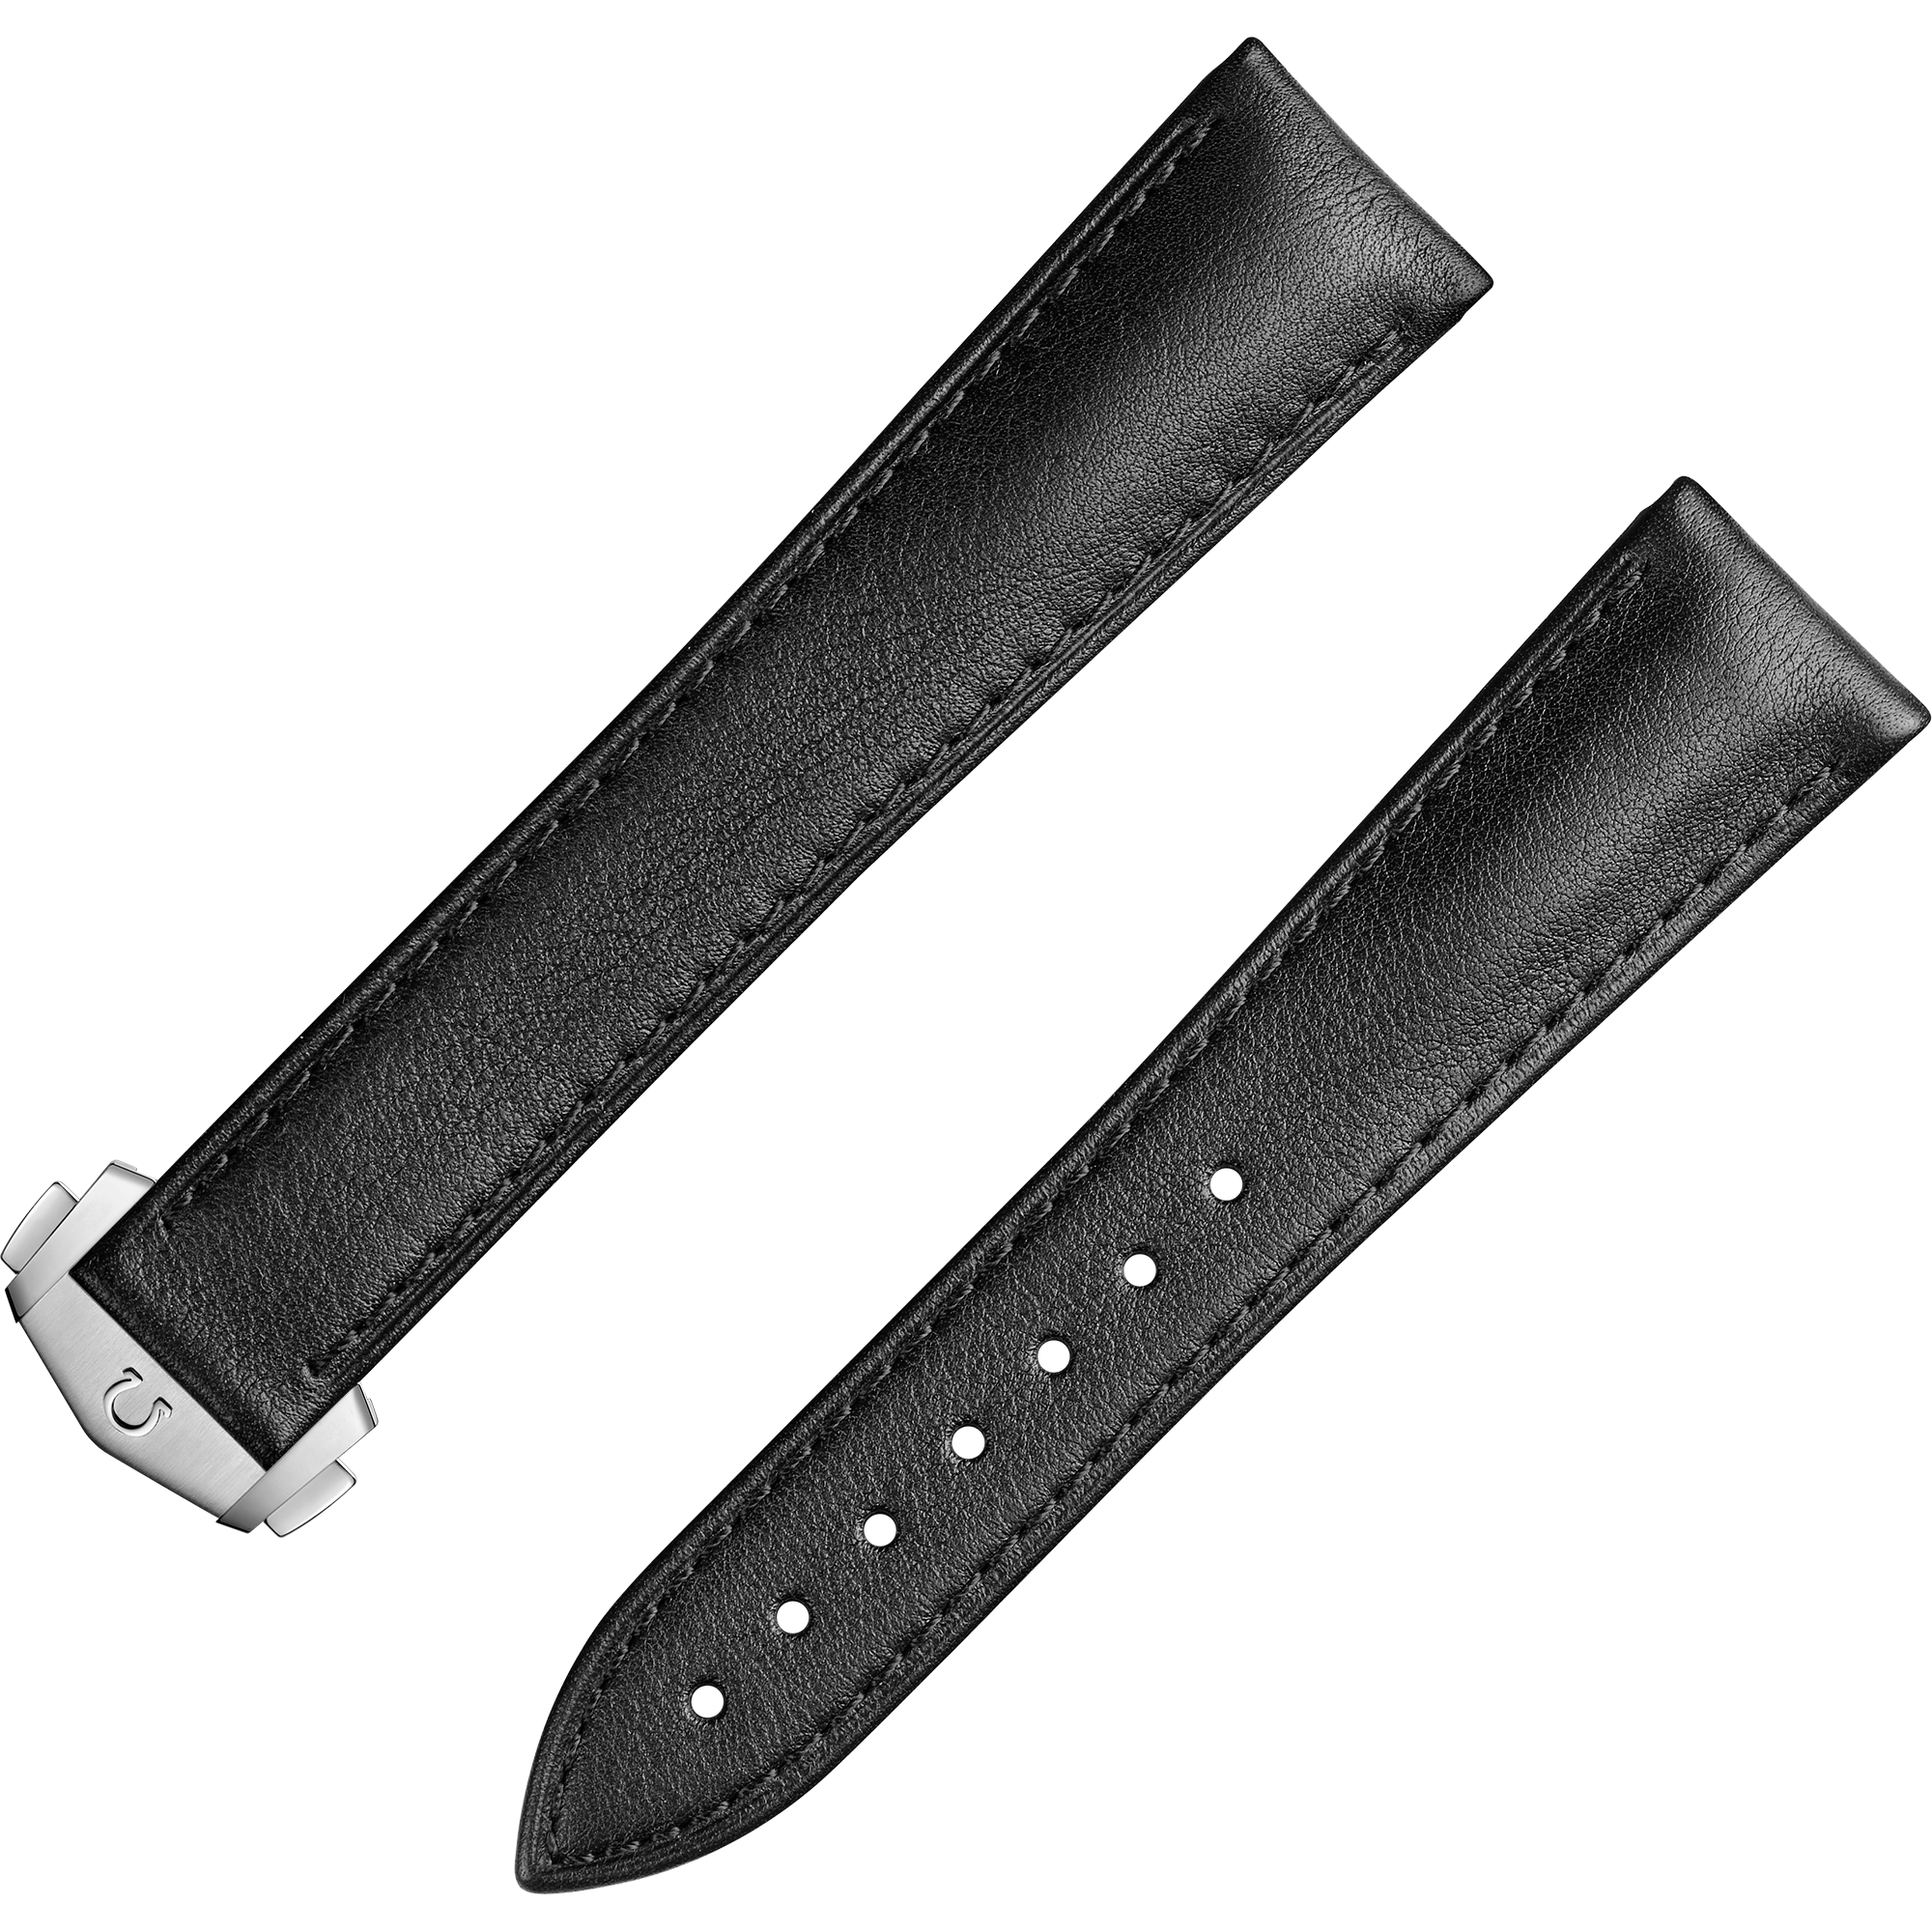 Two-piece strap - Speedmaster Moonwatch black leather strap with foldover clasp - 032CUZ014116